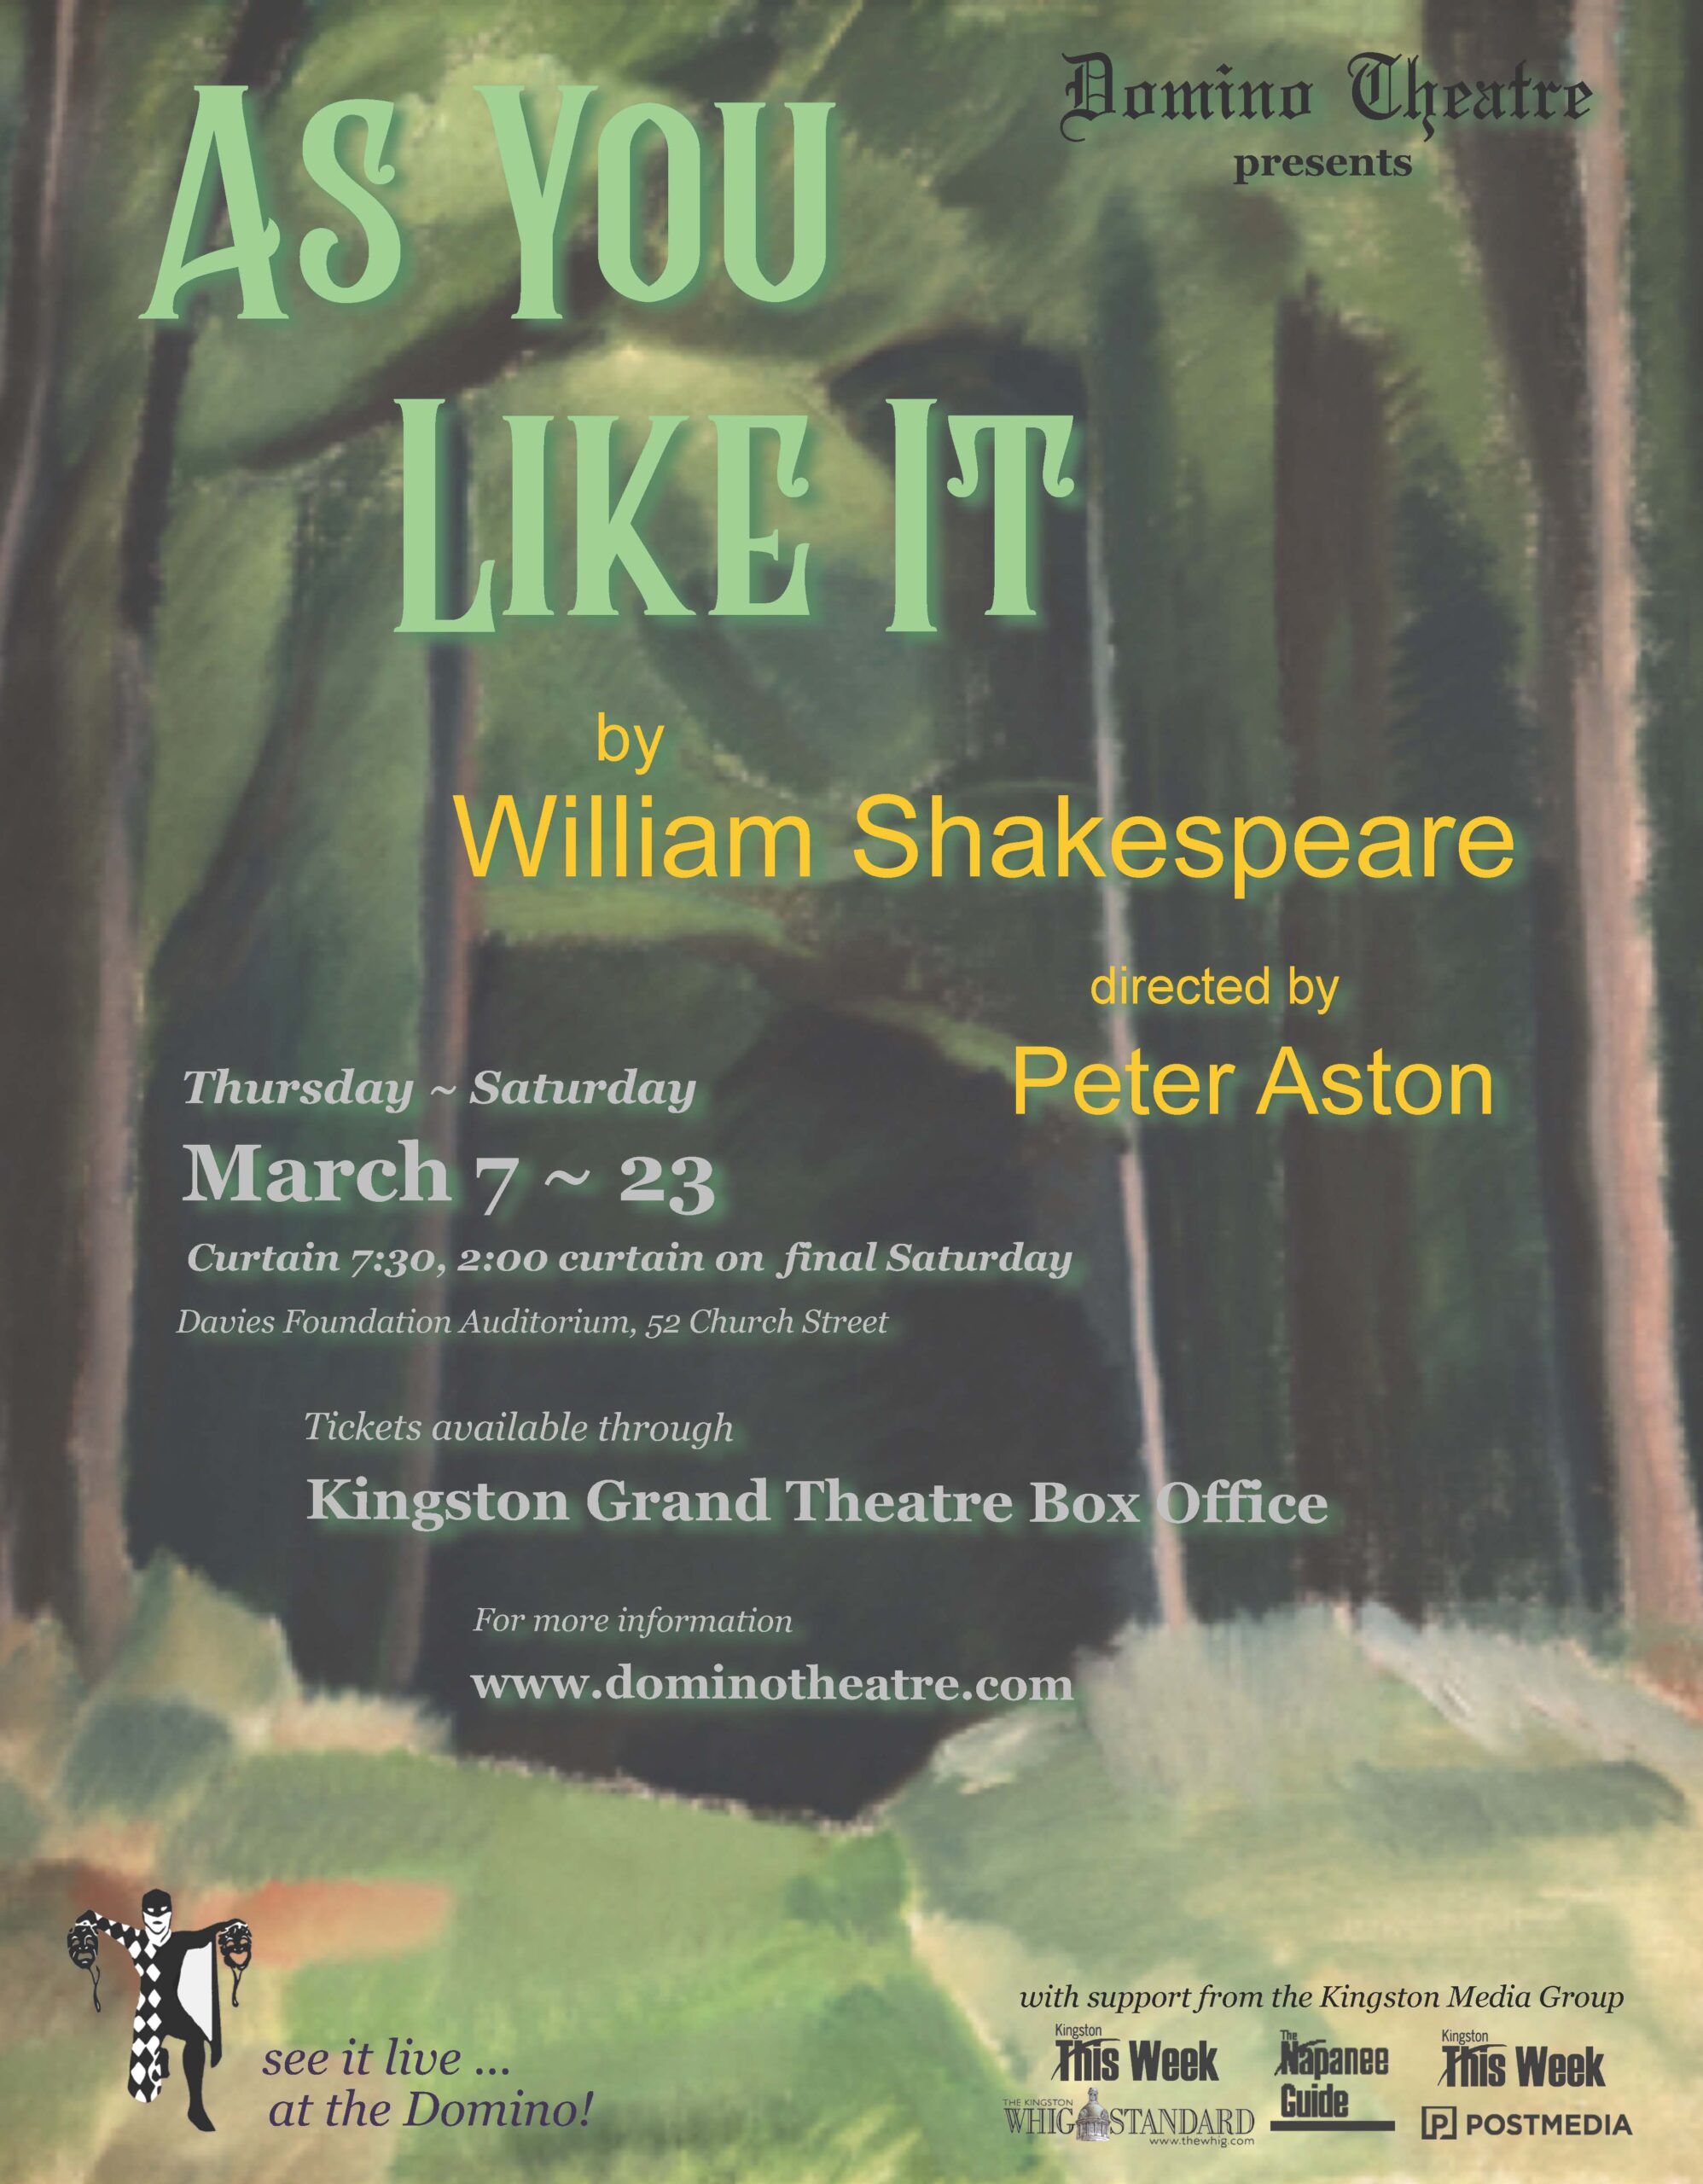 Poster for Domino Theatre's production of 'As You Like It'. Poster includes the title, playwright, director, location, dates, times, ticket information, and supporters. The background is a dark forest.